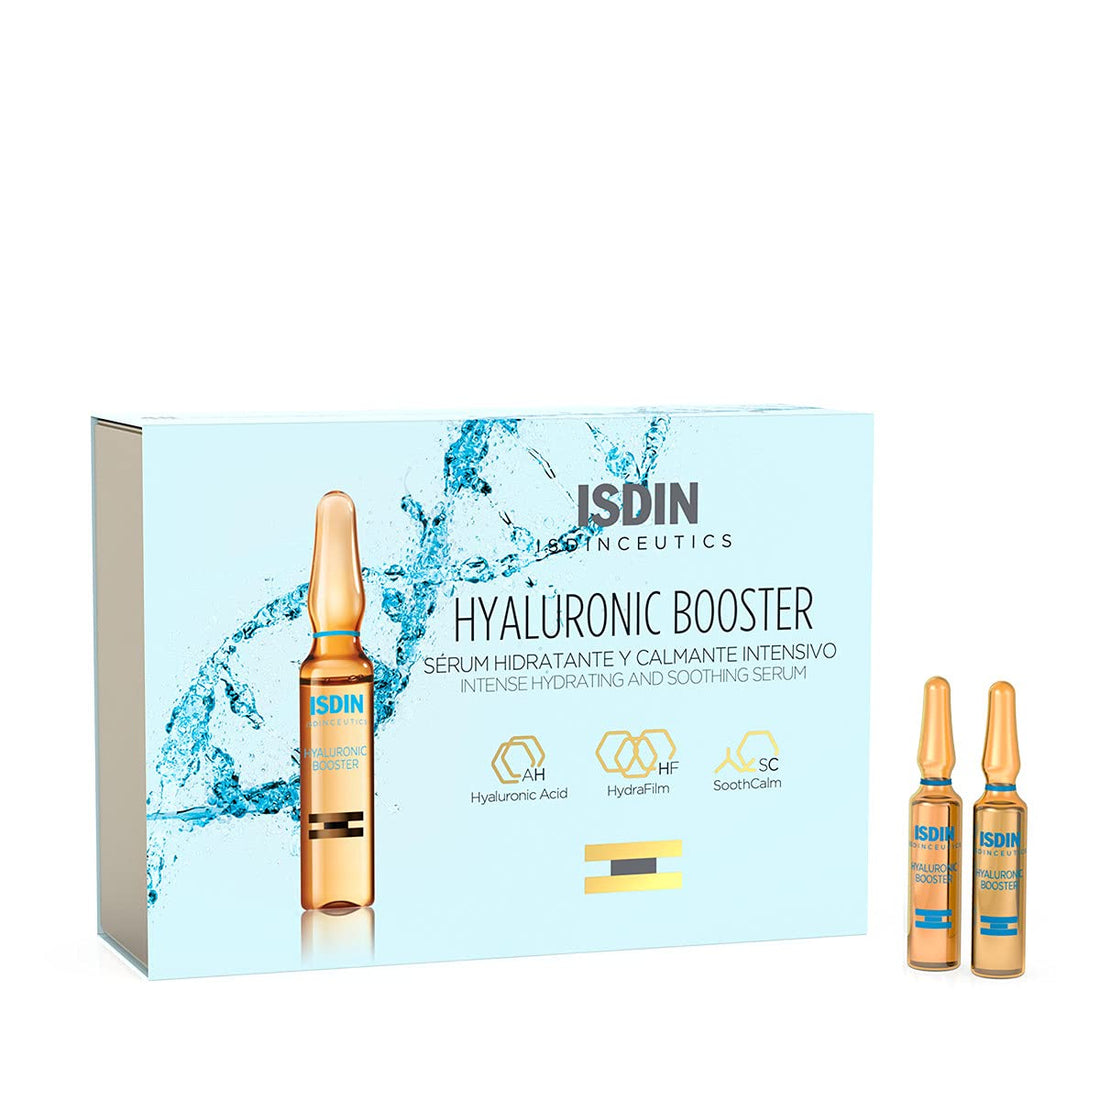 ISDIN Hyaluronic Booster 30 Ampoules ISDIN 2ml x 30 ampoules Shop Skin Type Solutions